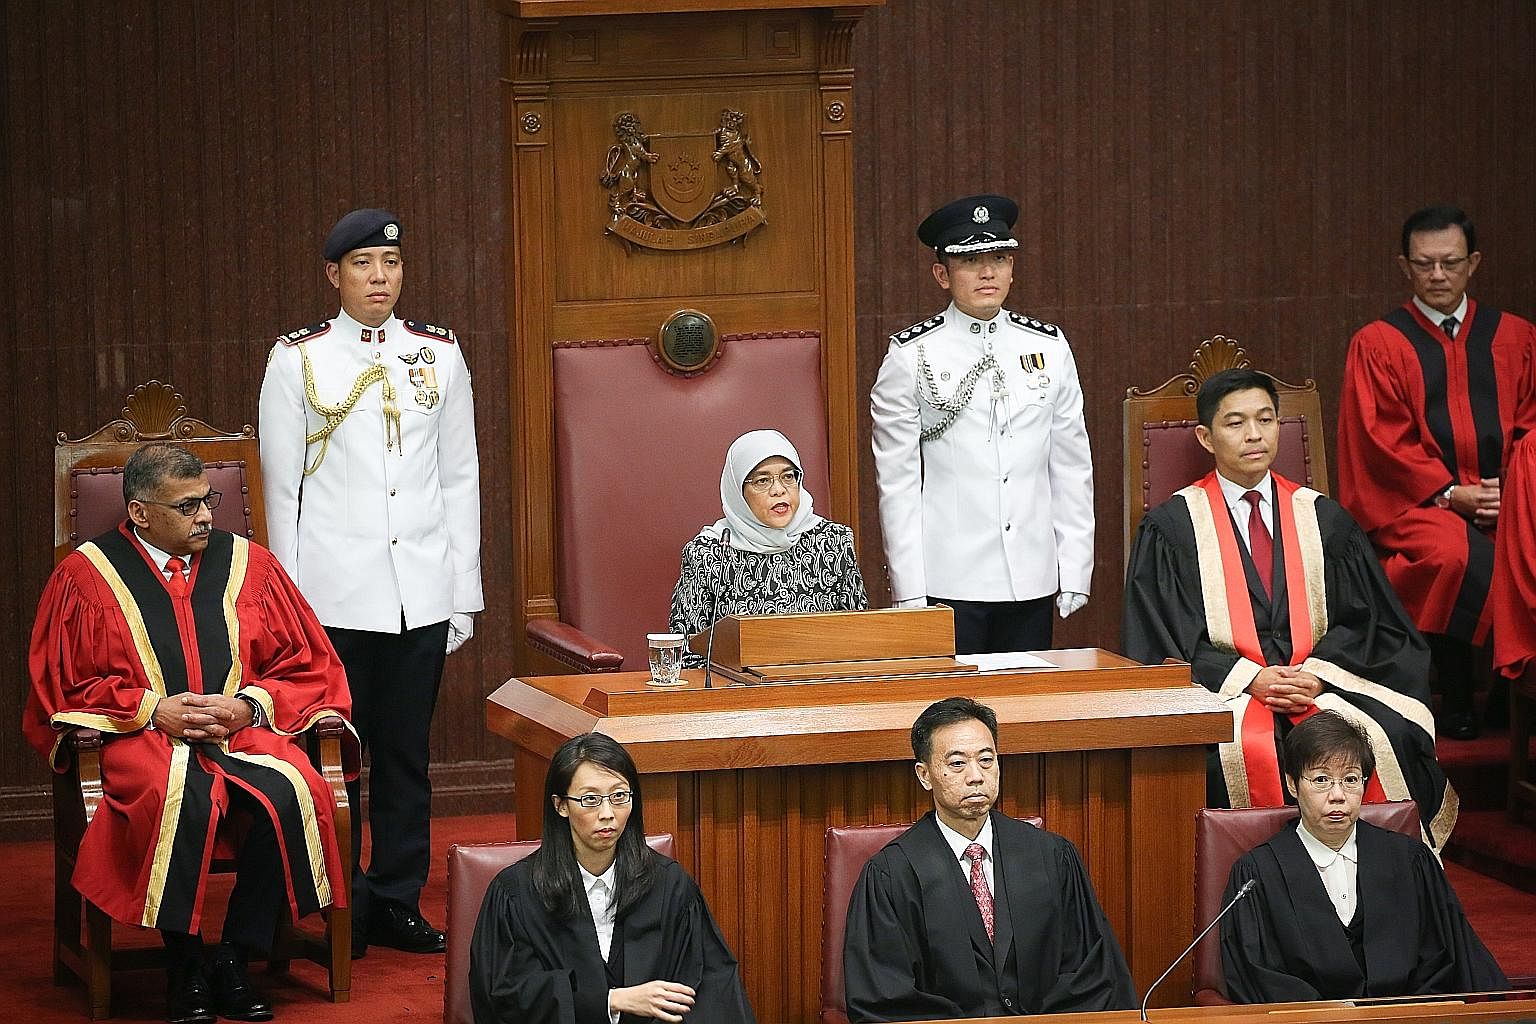 President Halimah Yacob, flanked by Speaker of Parliament Tan Chuan-Jin and Chief Justice Sundaresh Menon, representing the different branches of government, addressed a packed chamber at Parliament House yesterday.